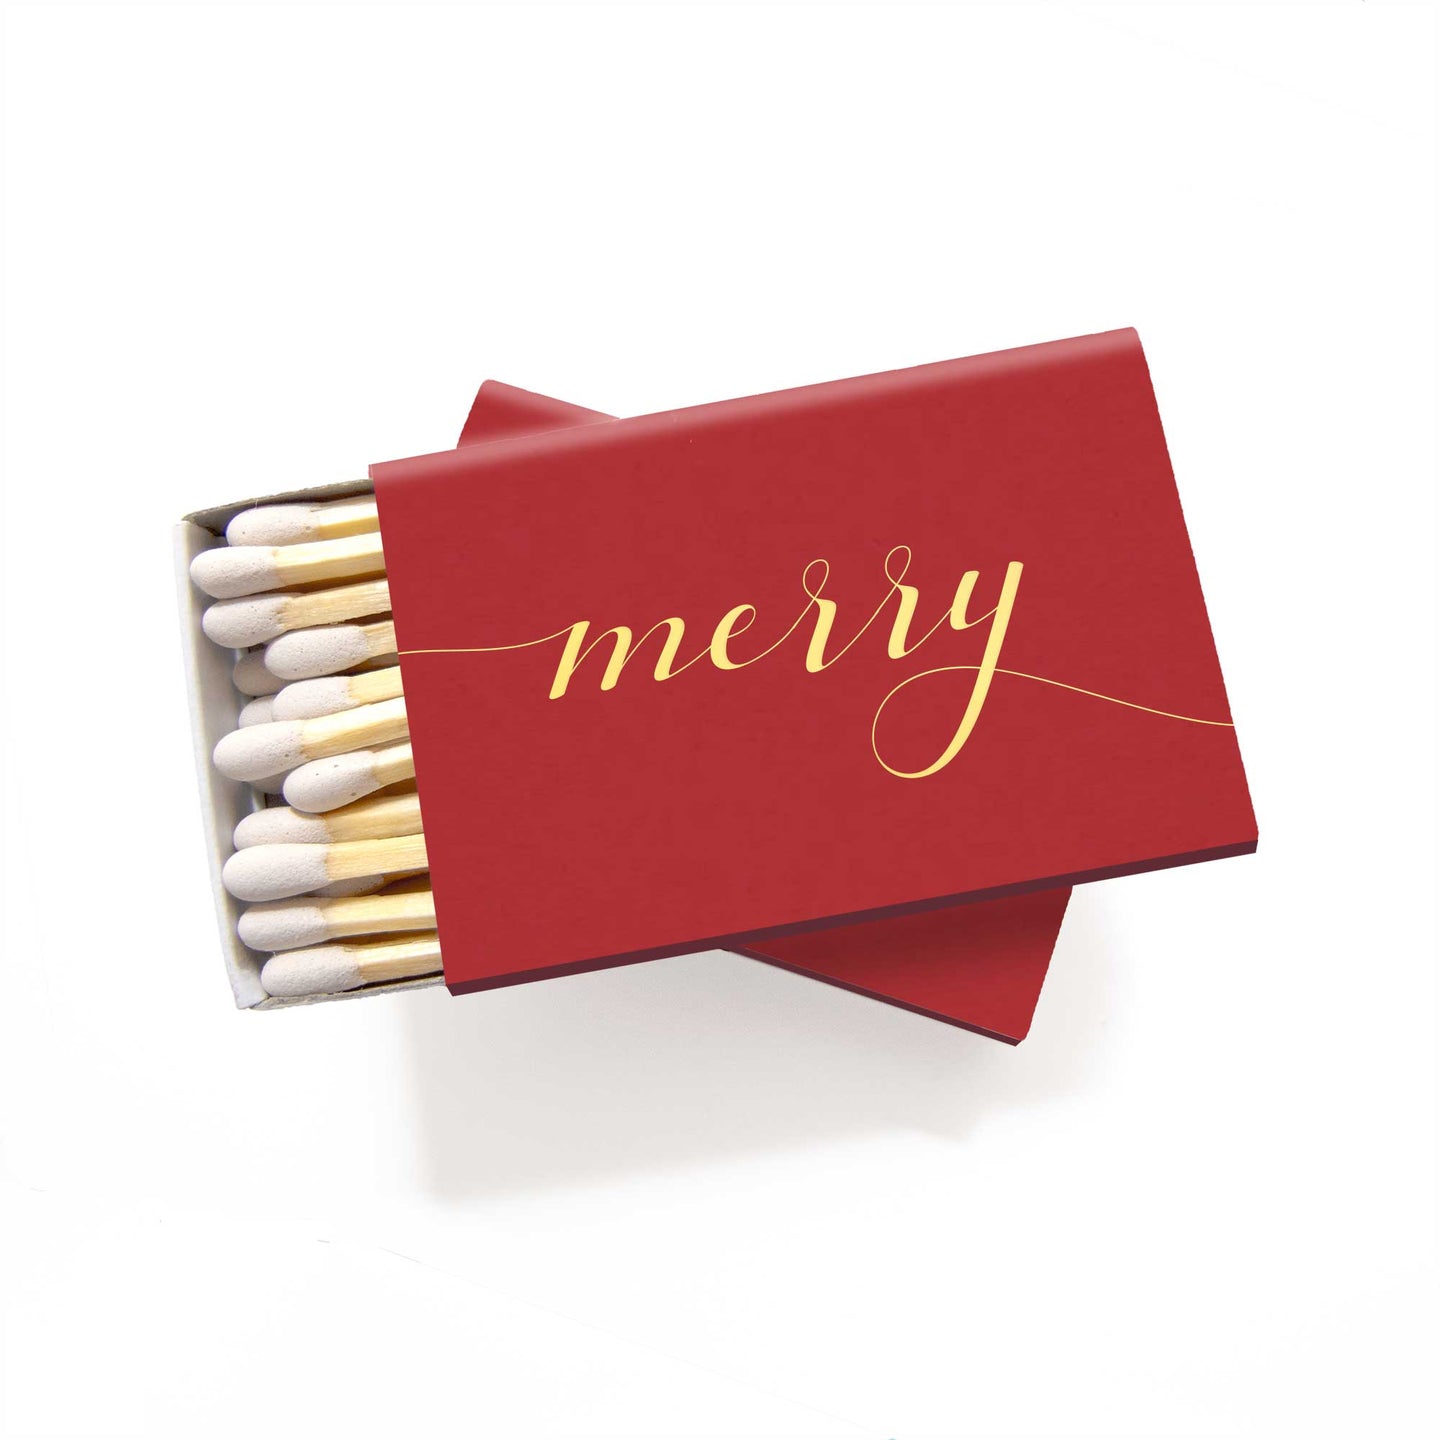 Merry Matches for Christmas in Red and Gold